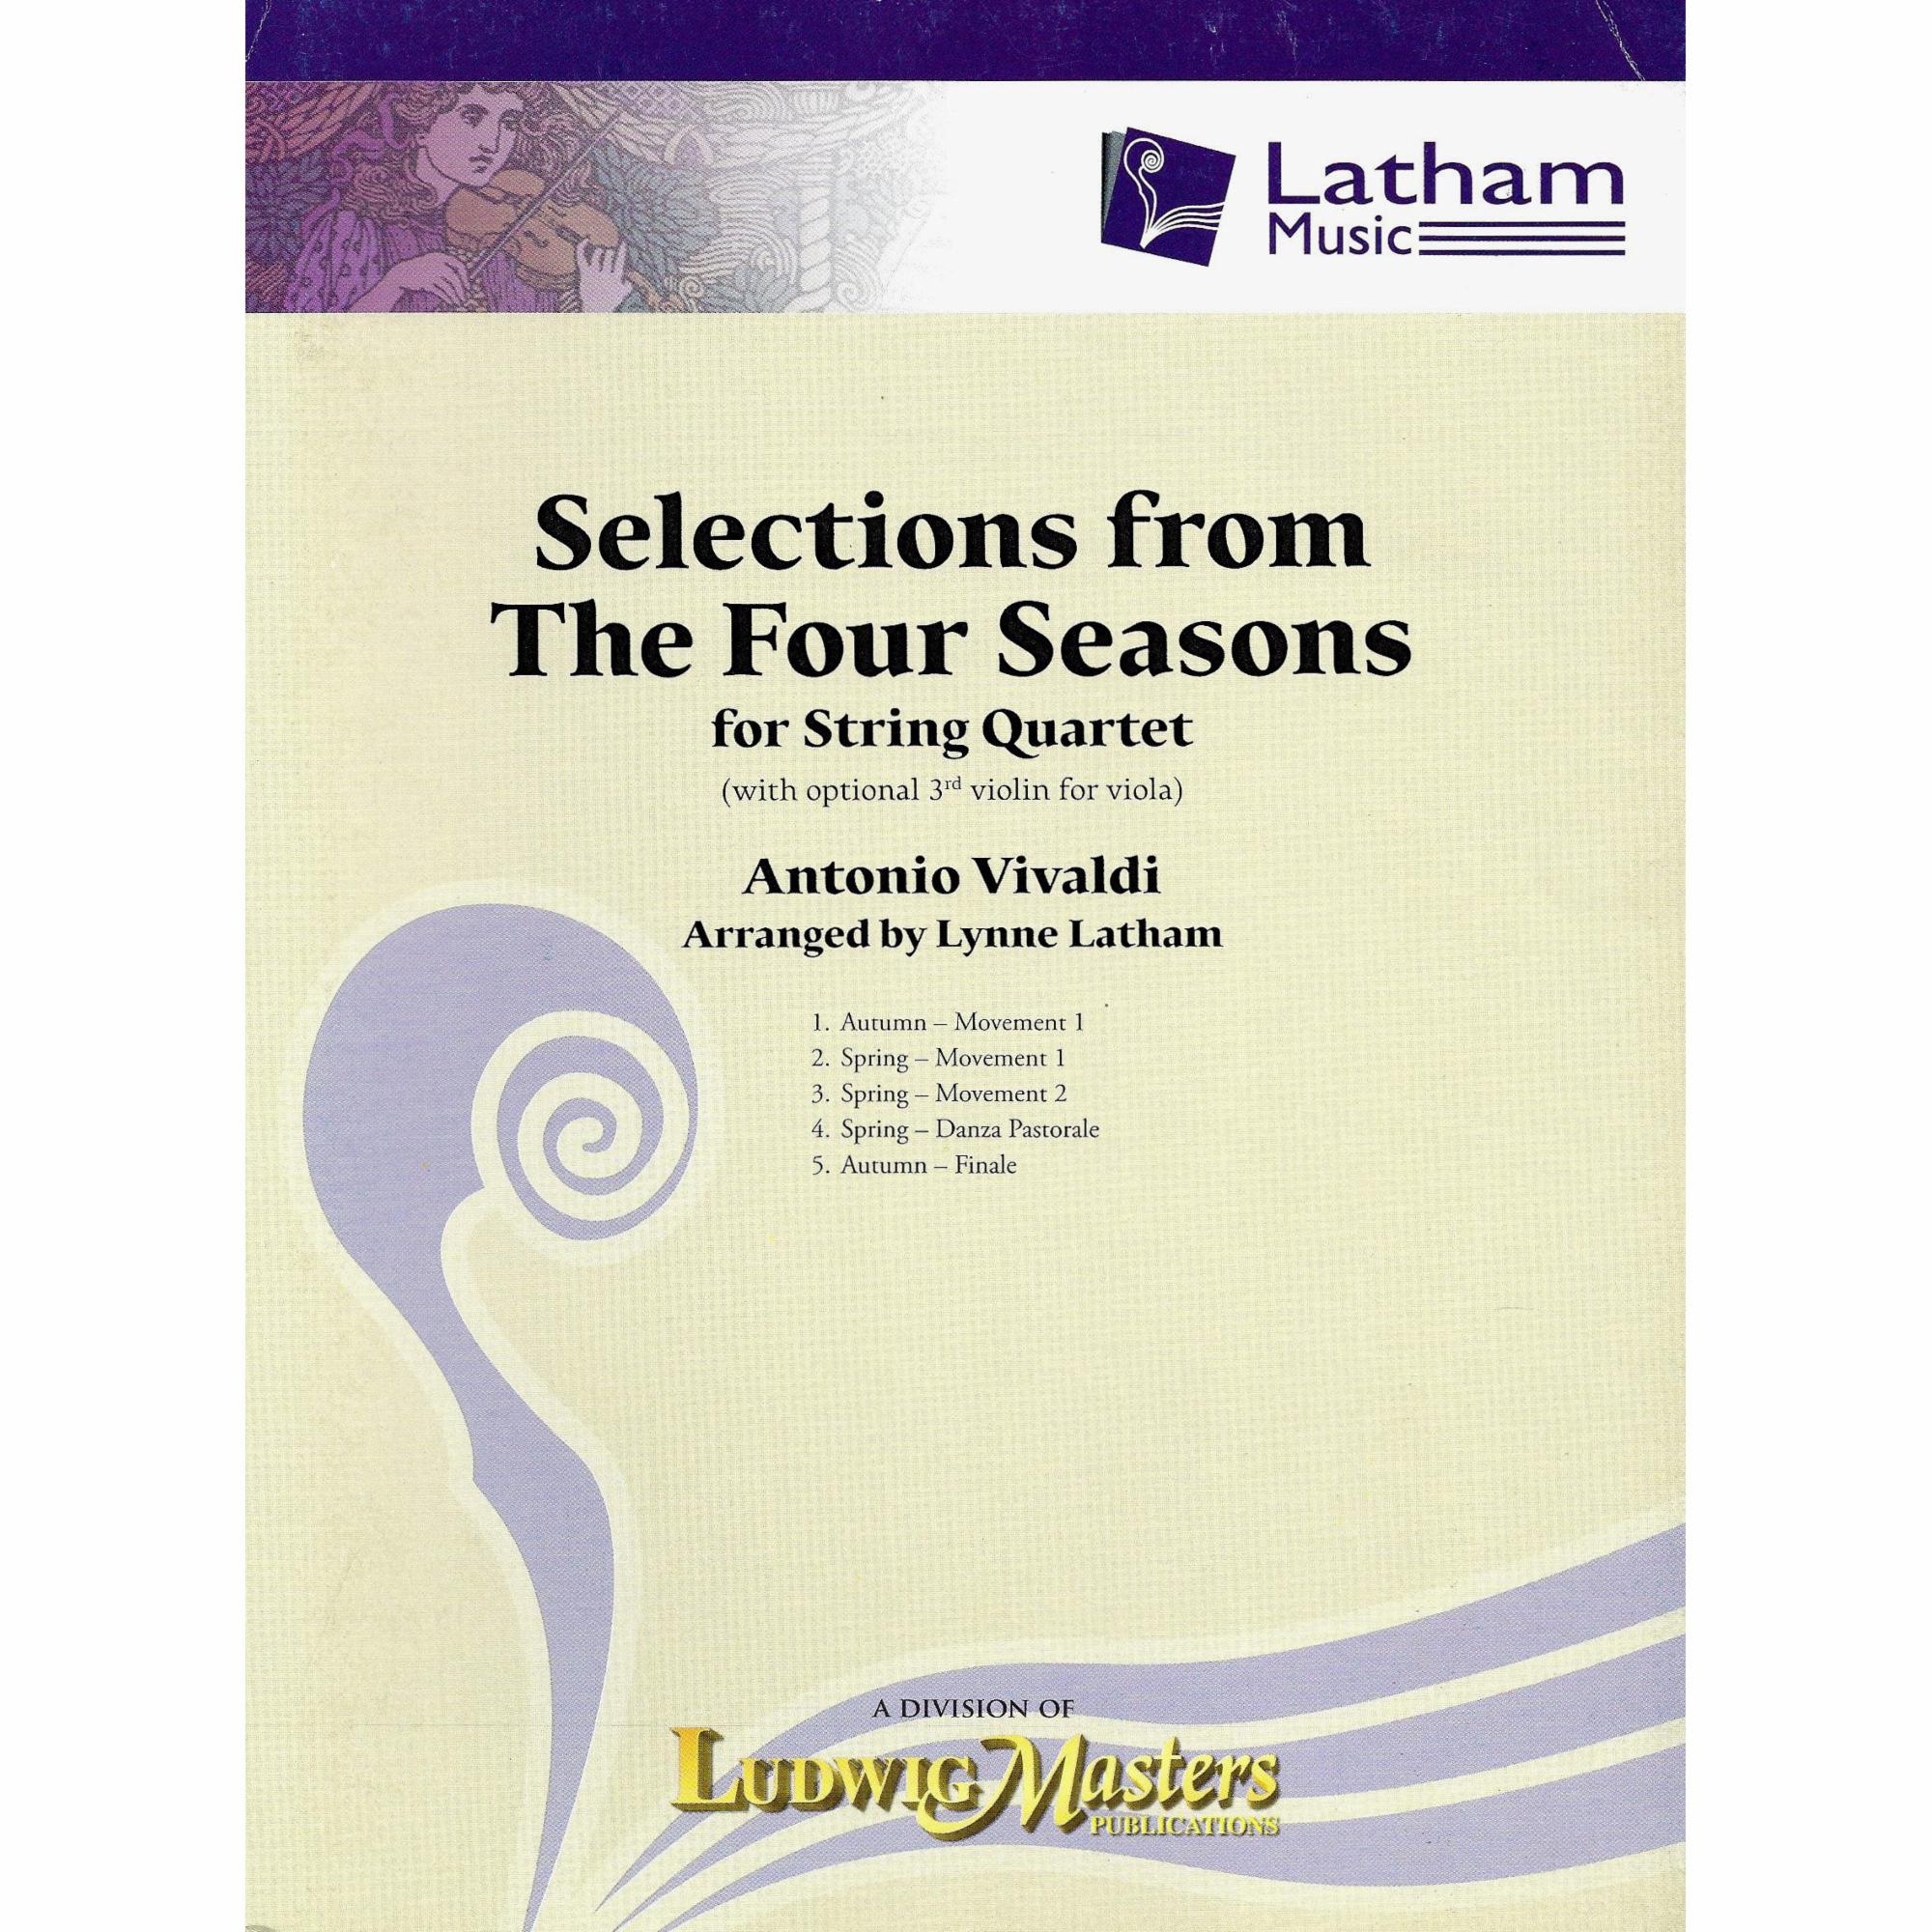 Selections from The Four Seasons for String Quartet